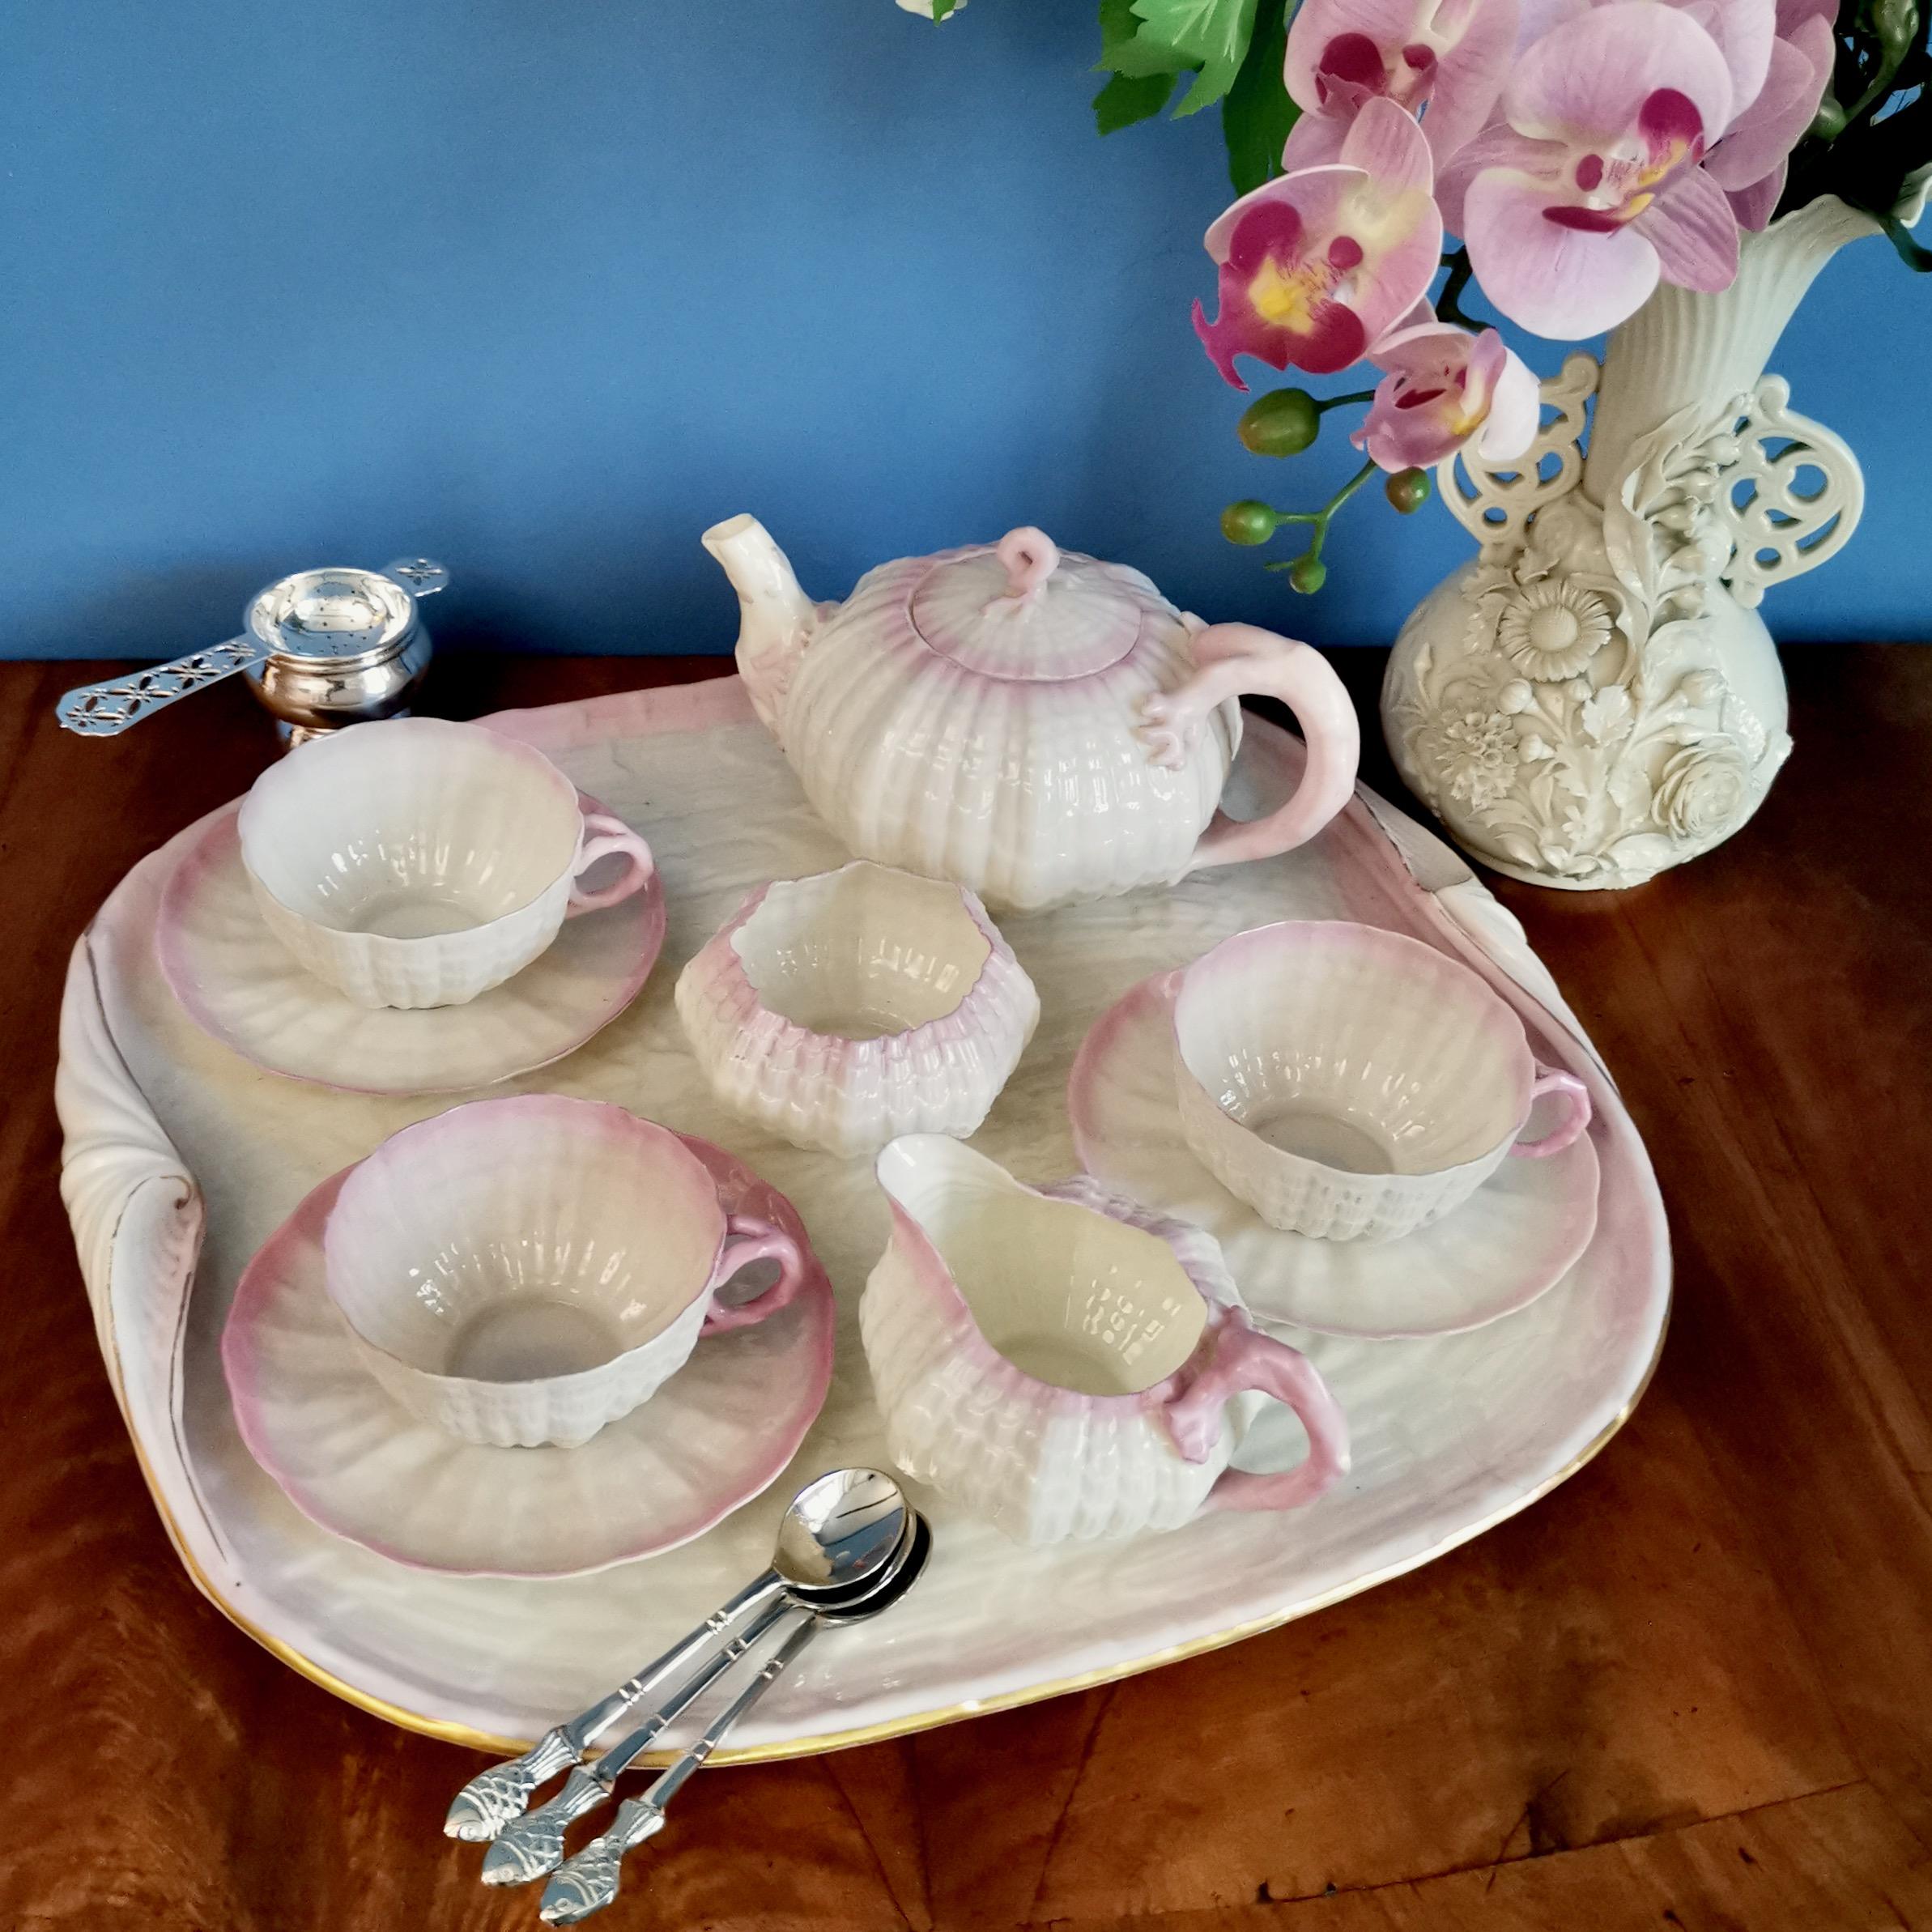 This is a beautiful Belleek cabaret set in the pink Tridacna design, consisting of a teapot, three teacups and saucers, a milk jug and a sugar bowl, all placed on a large tray. All items carry the 2nd Black Mark, which was used between 1891 and